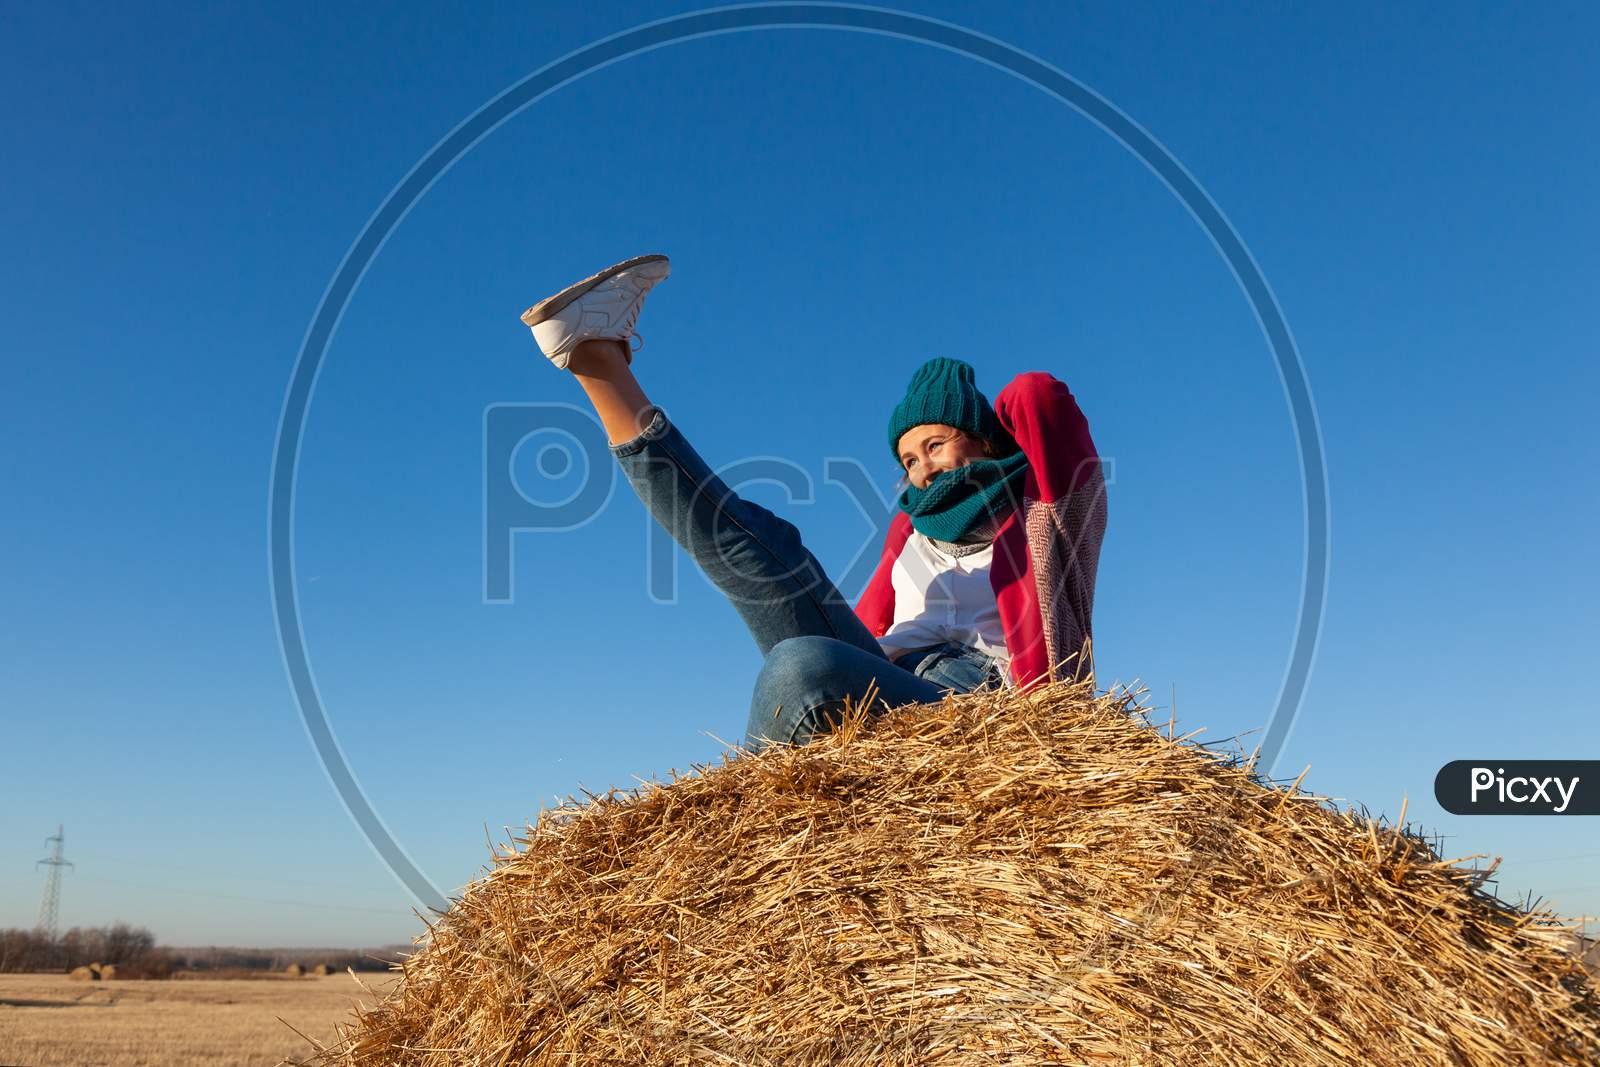 Portrait Of A Beautiful Young Model In  Blue Knitted Hat  And Warm Clothes  Have Fun,  Sitting On Haystacks In  Sunny Autumn Day . Autumn Warm Photo. Woman Smiling And Look Away, Joyful Cheerful Mood.